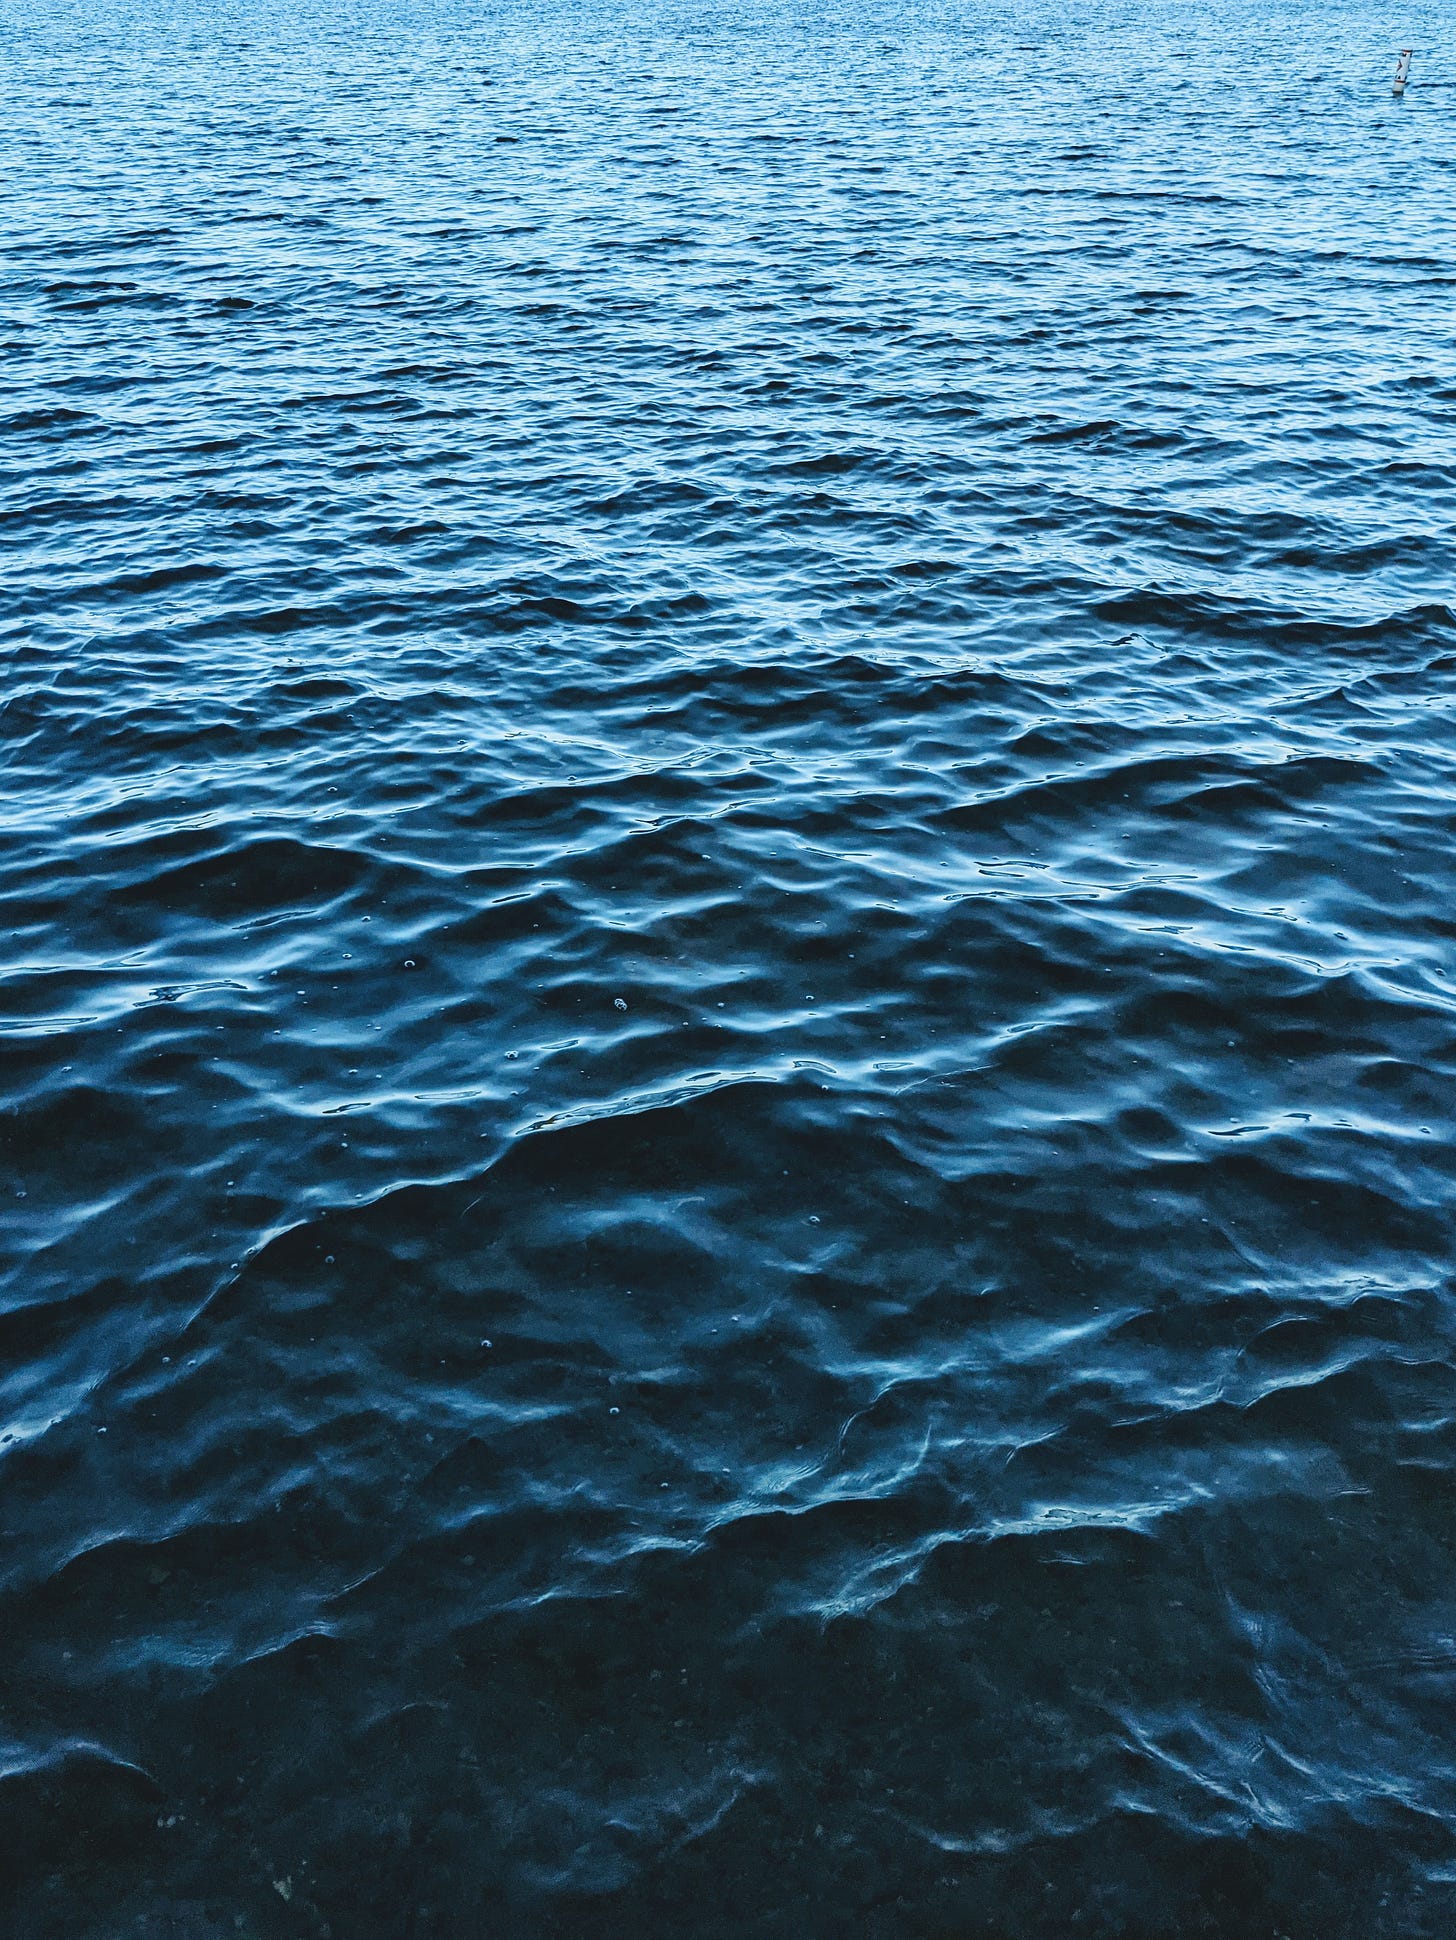 Closeup of lake water, at an agle, progressing from light blue to inky dark blue. Small ripples cover the surface.